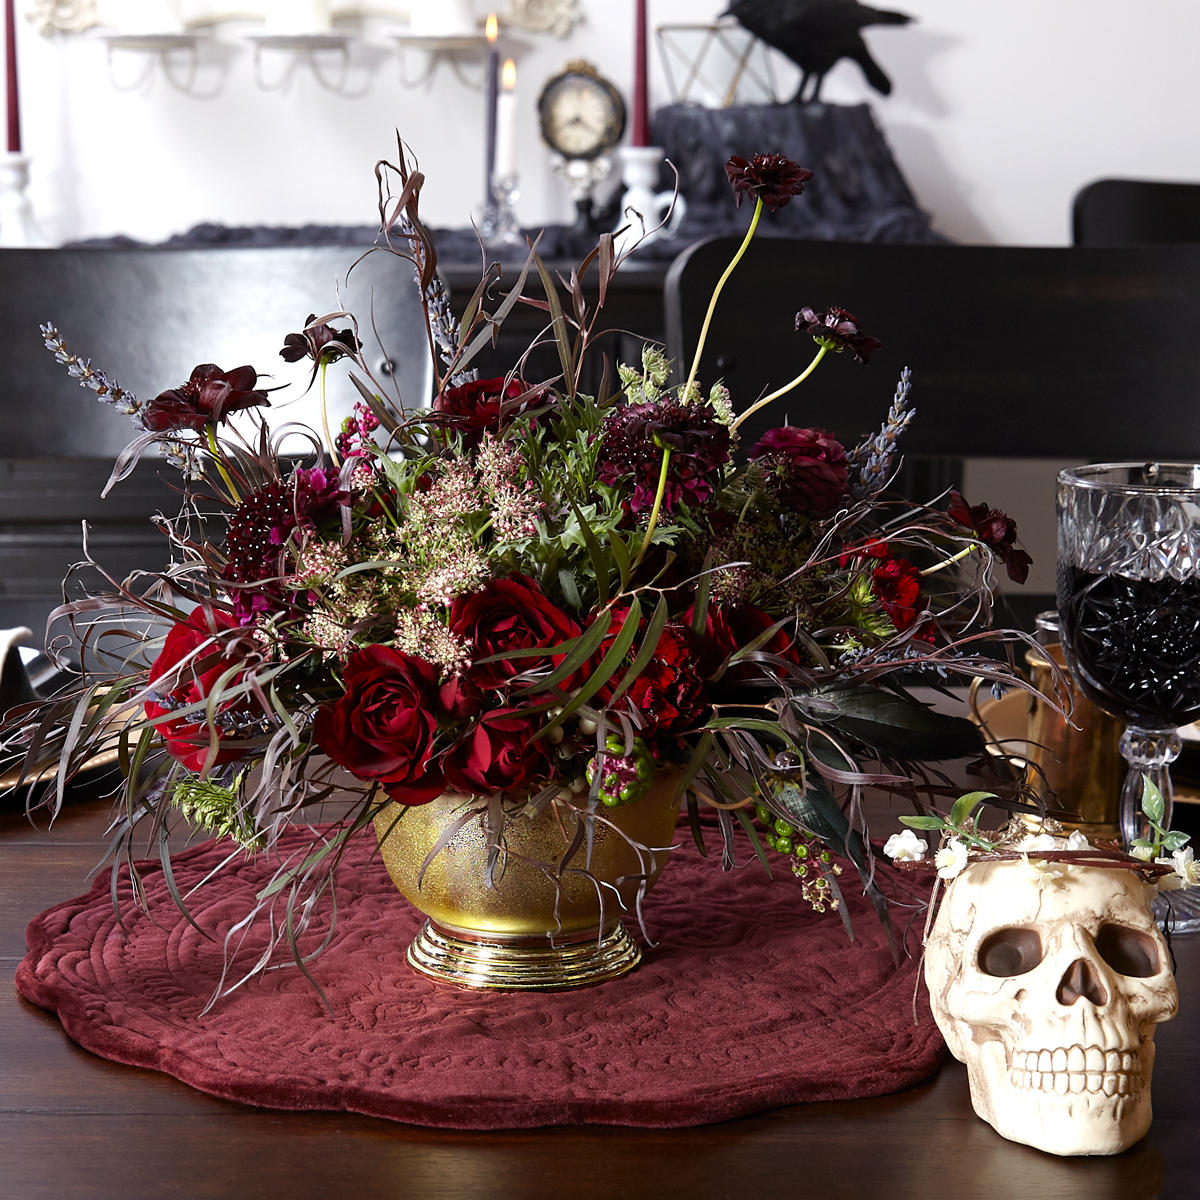 How to Host A Glamorous Gothic Style Party | For Your Party